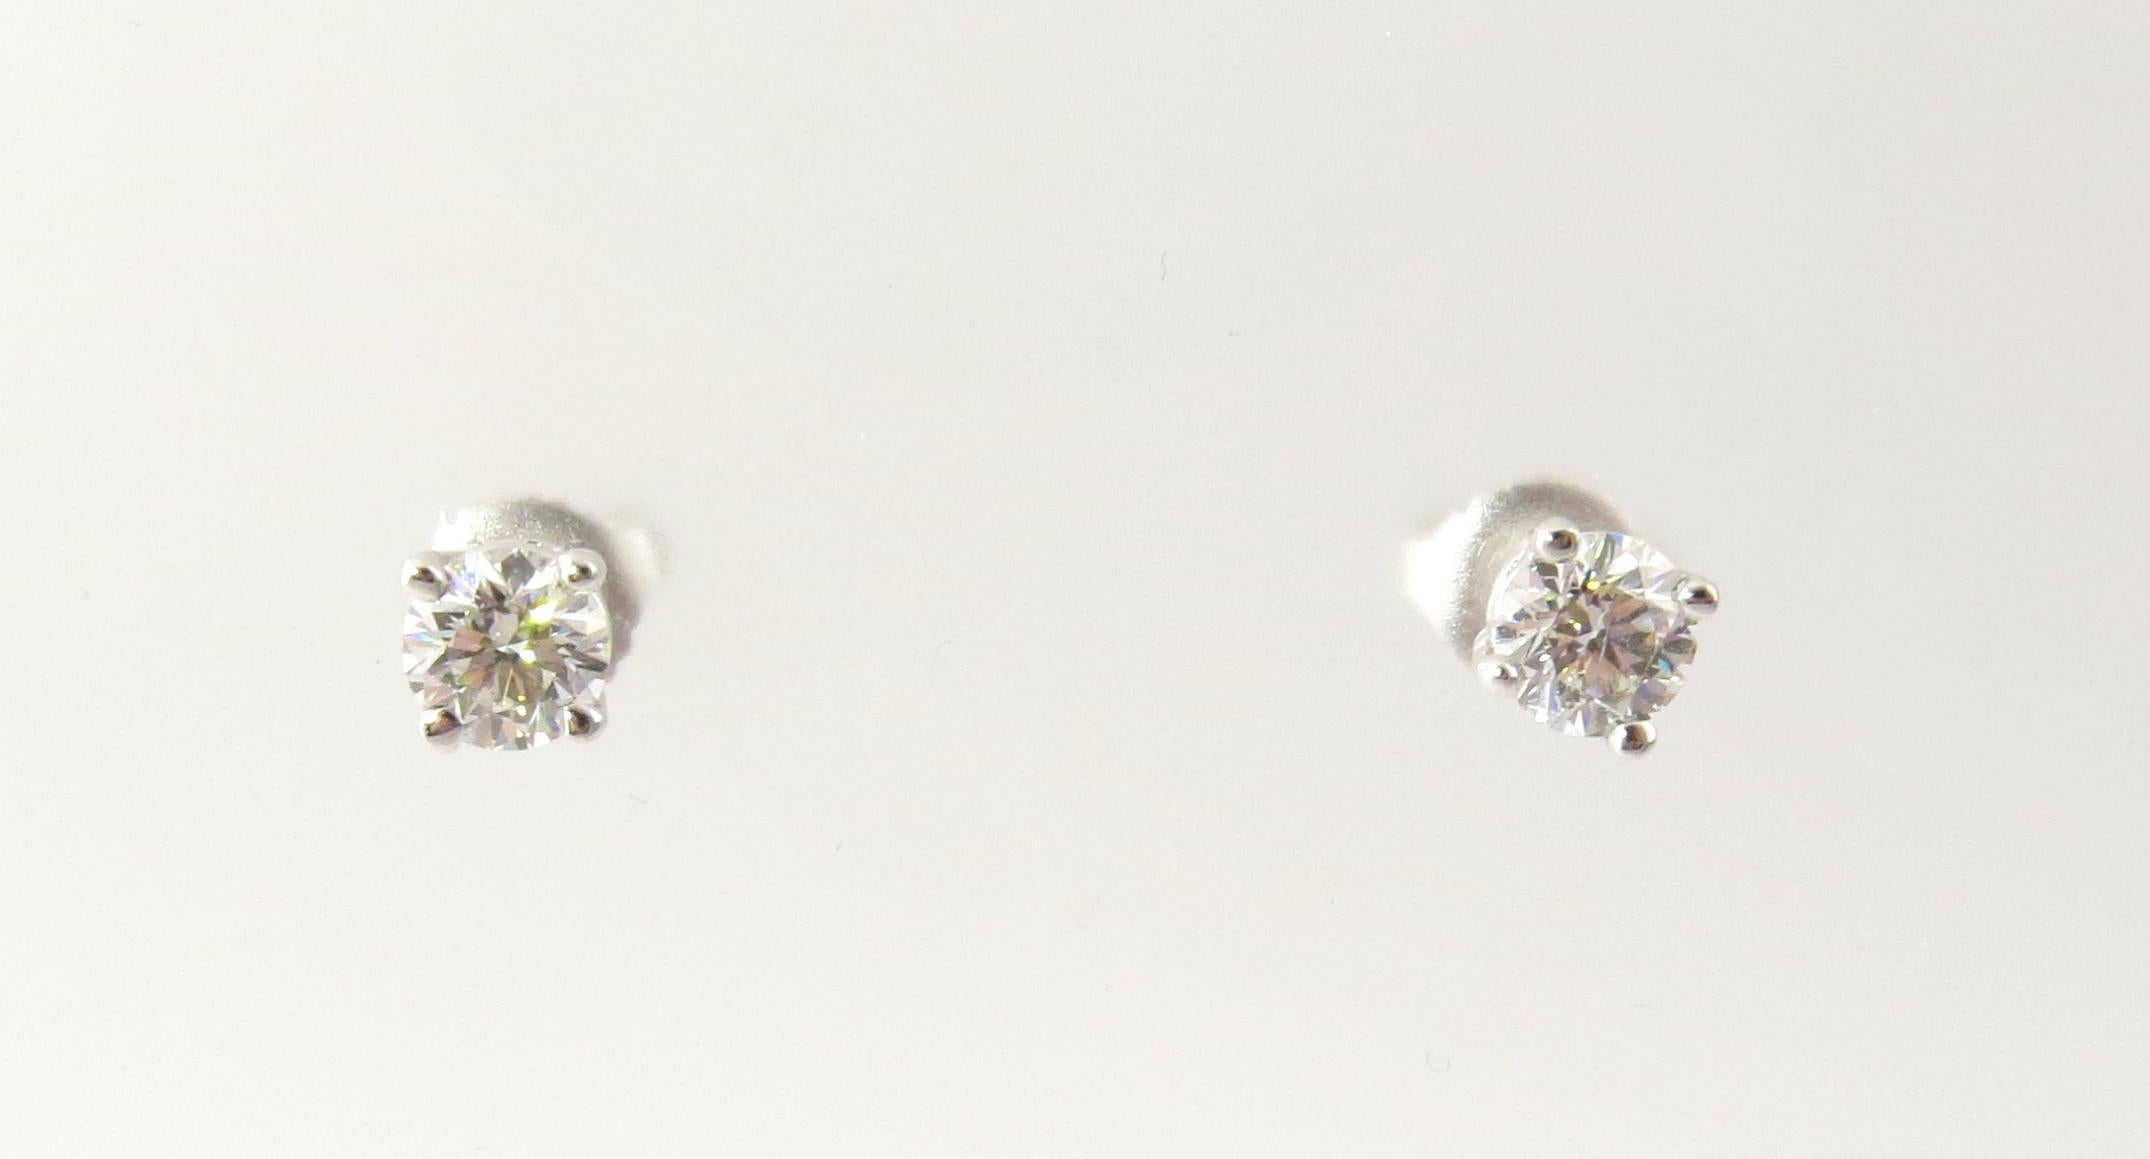 Vintage 14 Karat White Gold Diamond Stud Earrings .86 ct. twt.

These sparkling stud earrings each feature one round brilliant cut diamond set in classic 14K white gold. Push back closures.

Approximate total diamond weight: .86 ct.

Diamond color: